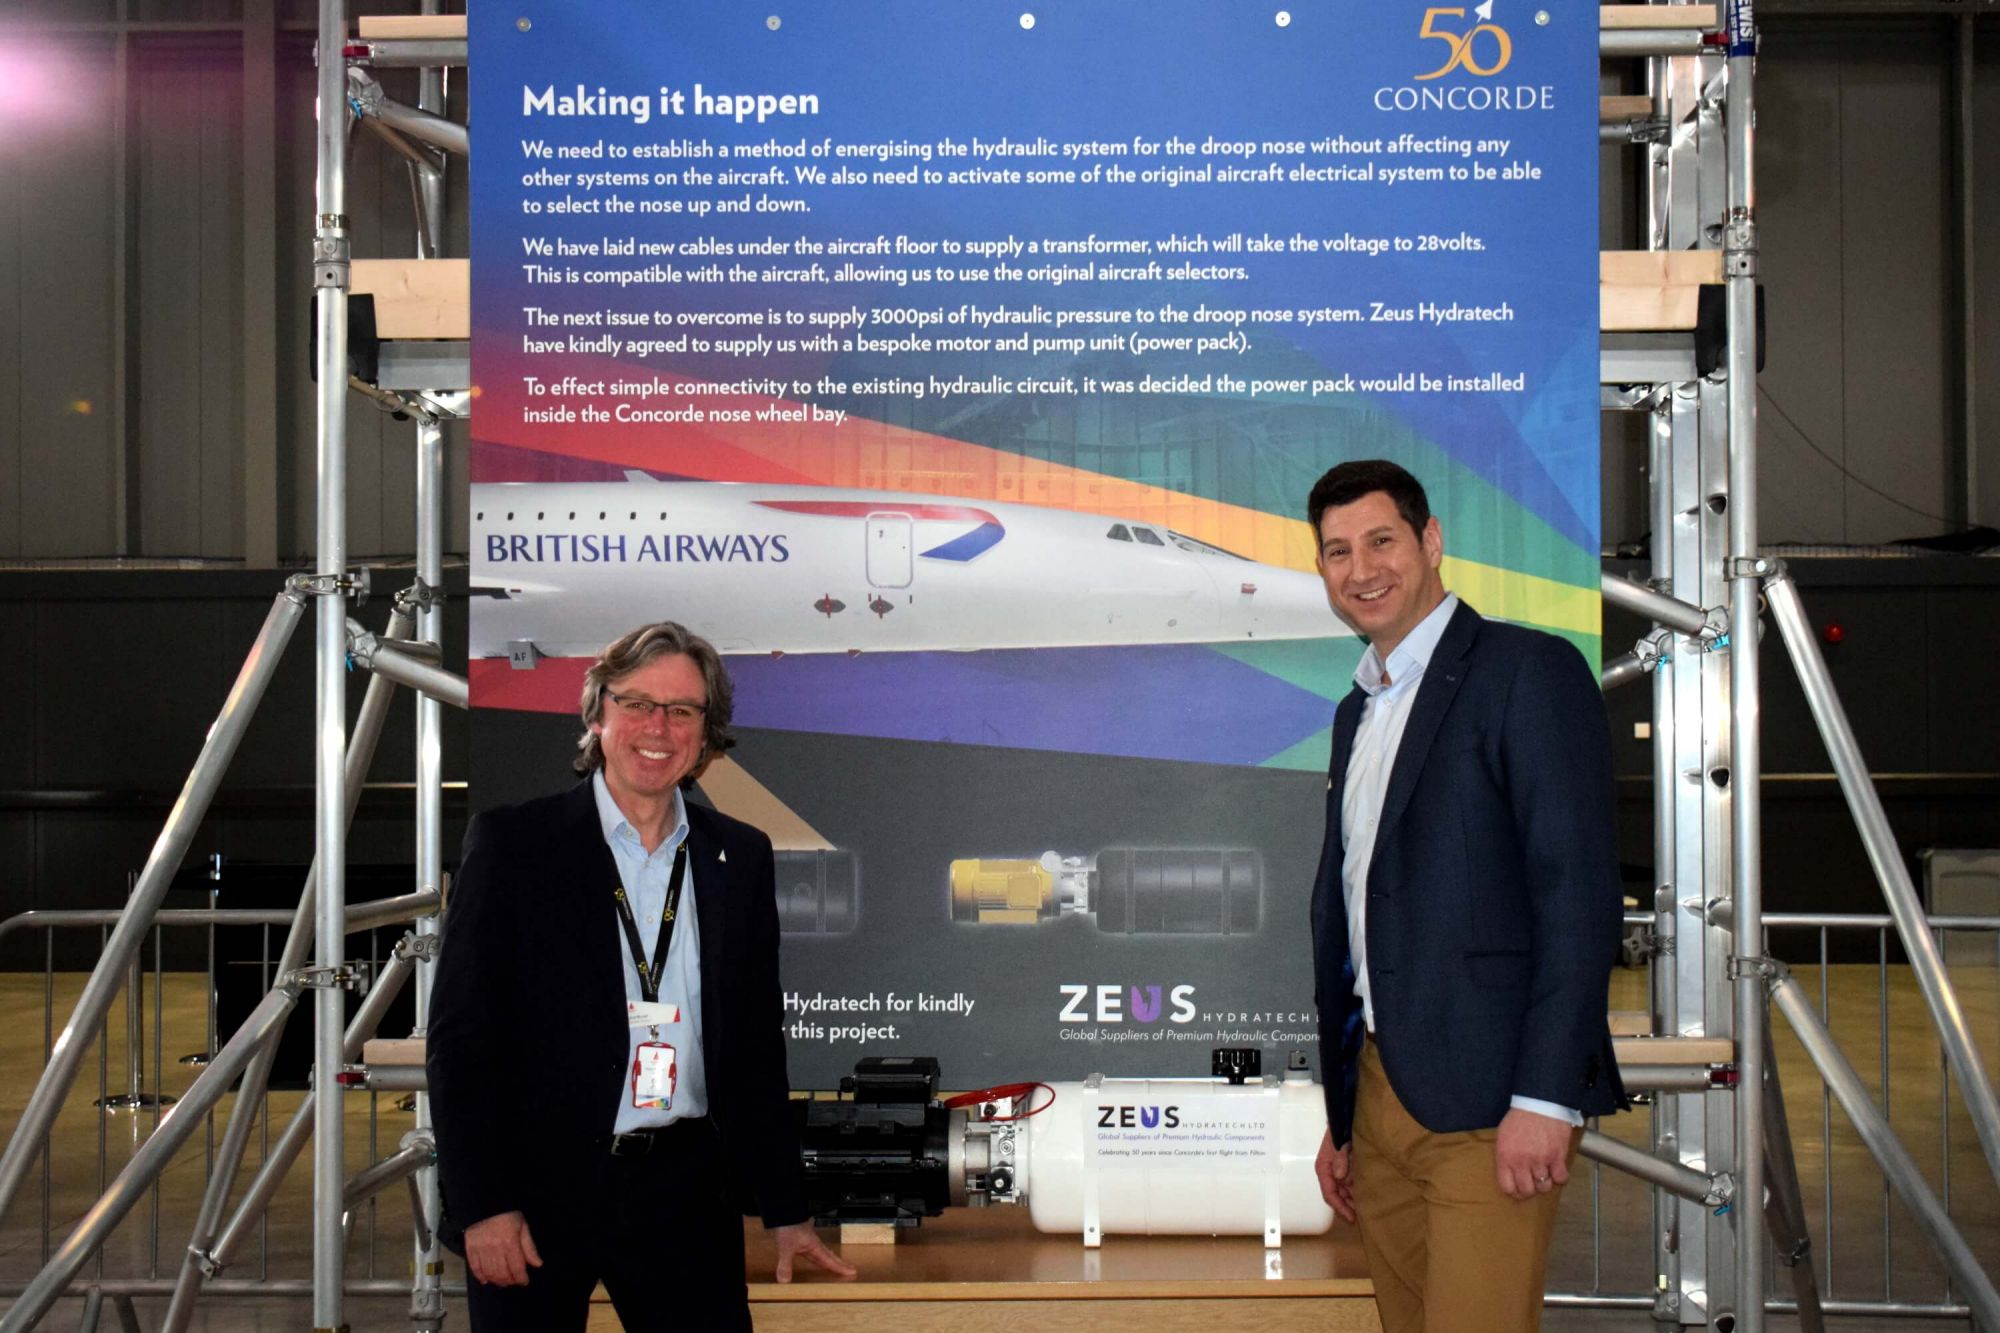 Lloyd Burnell of Aerospace Bristol with Oliver Starr of Zeus Hydratech Limited